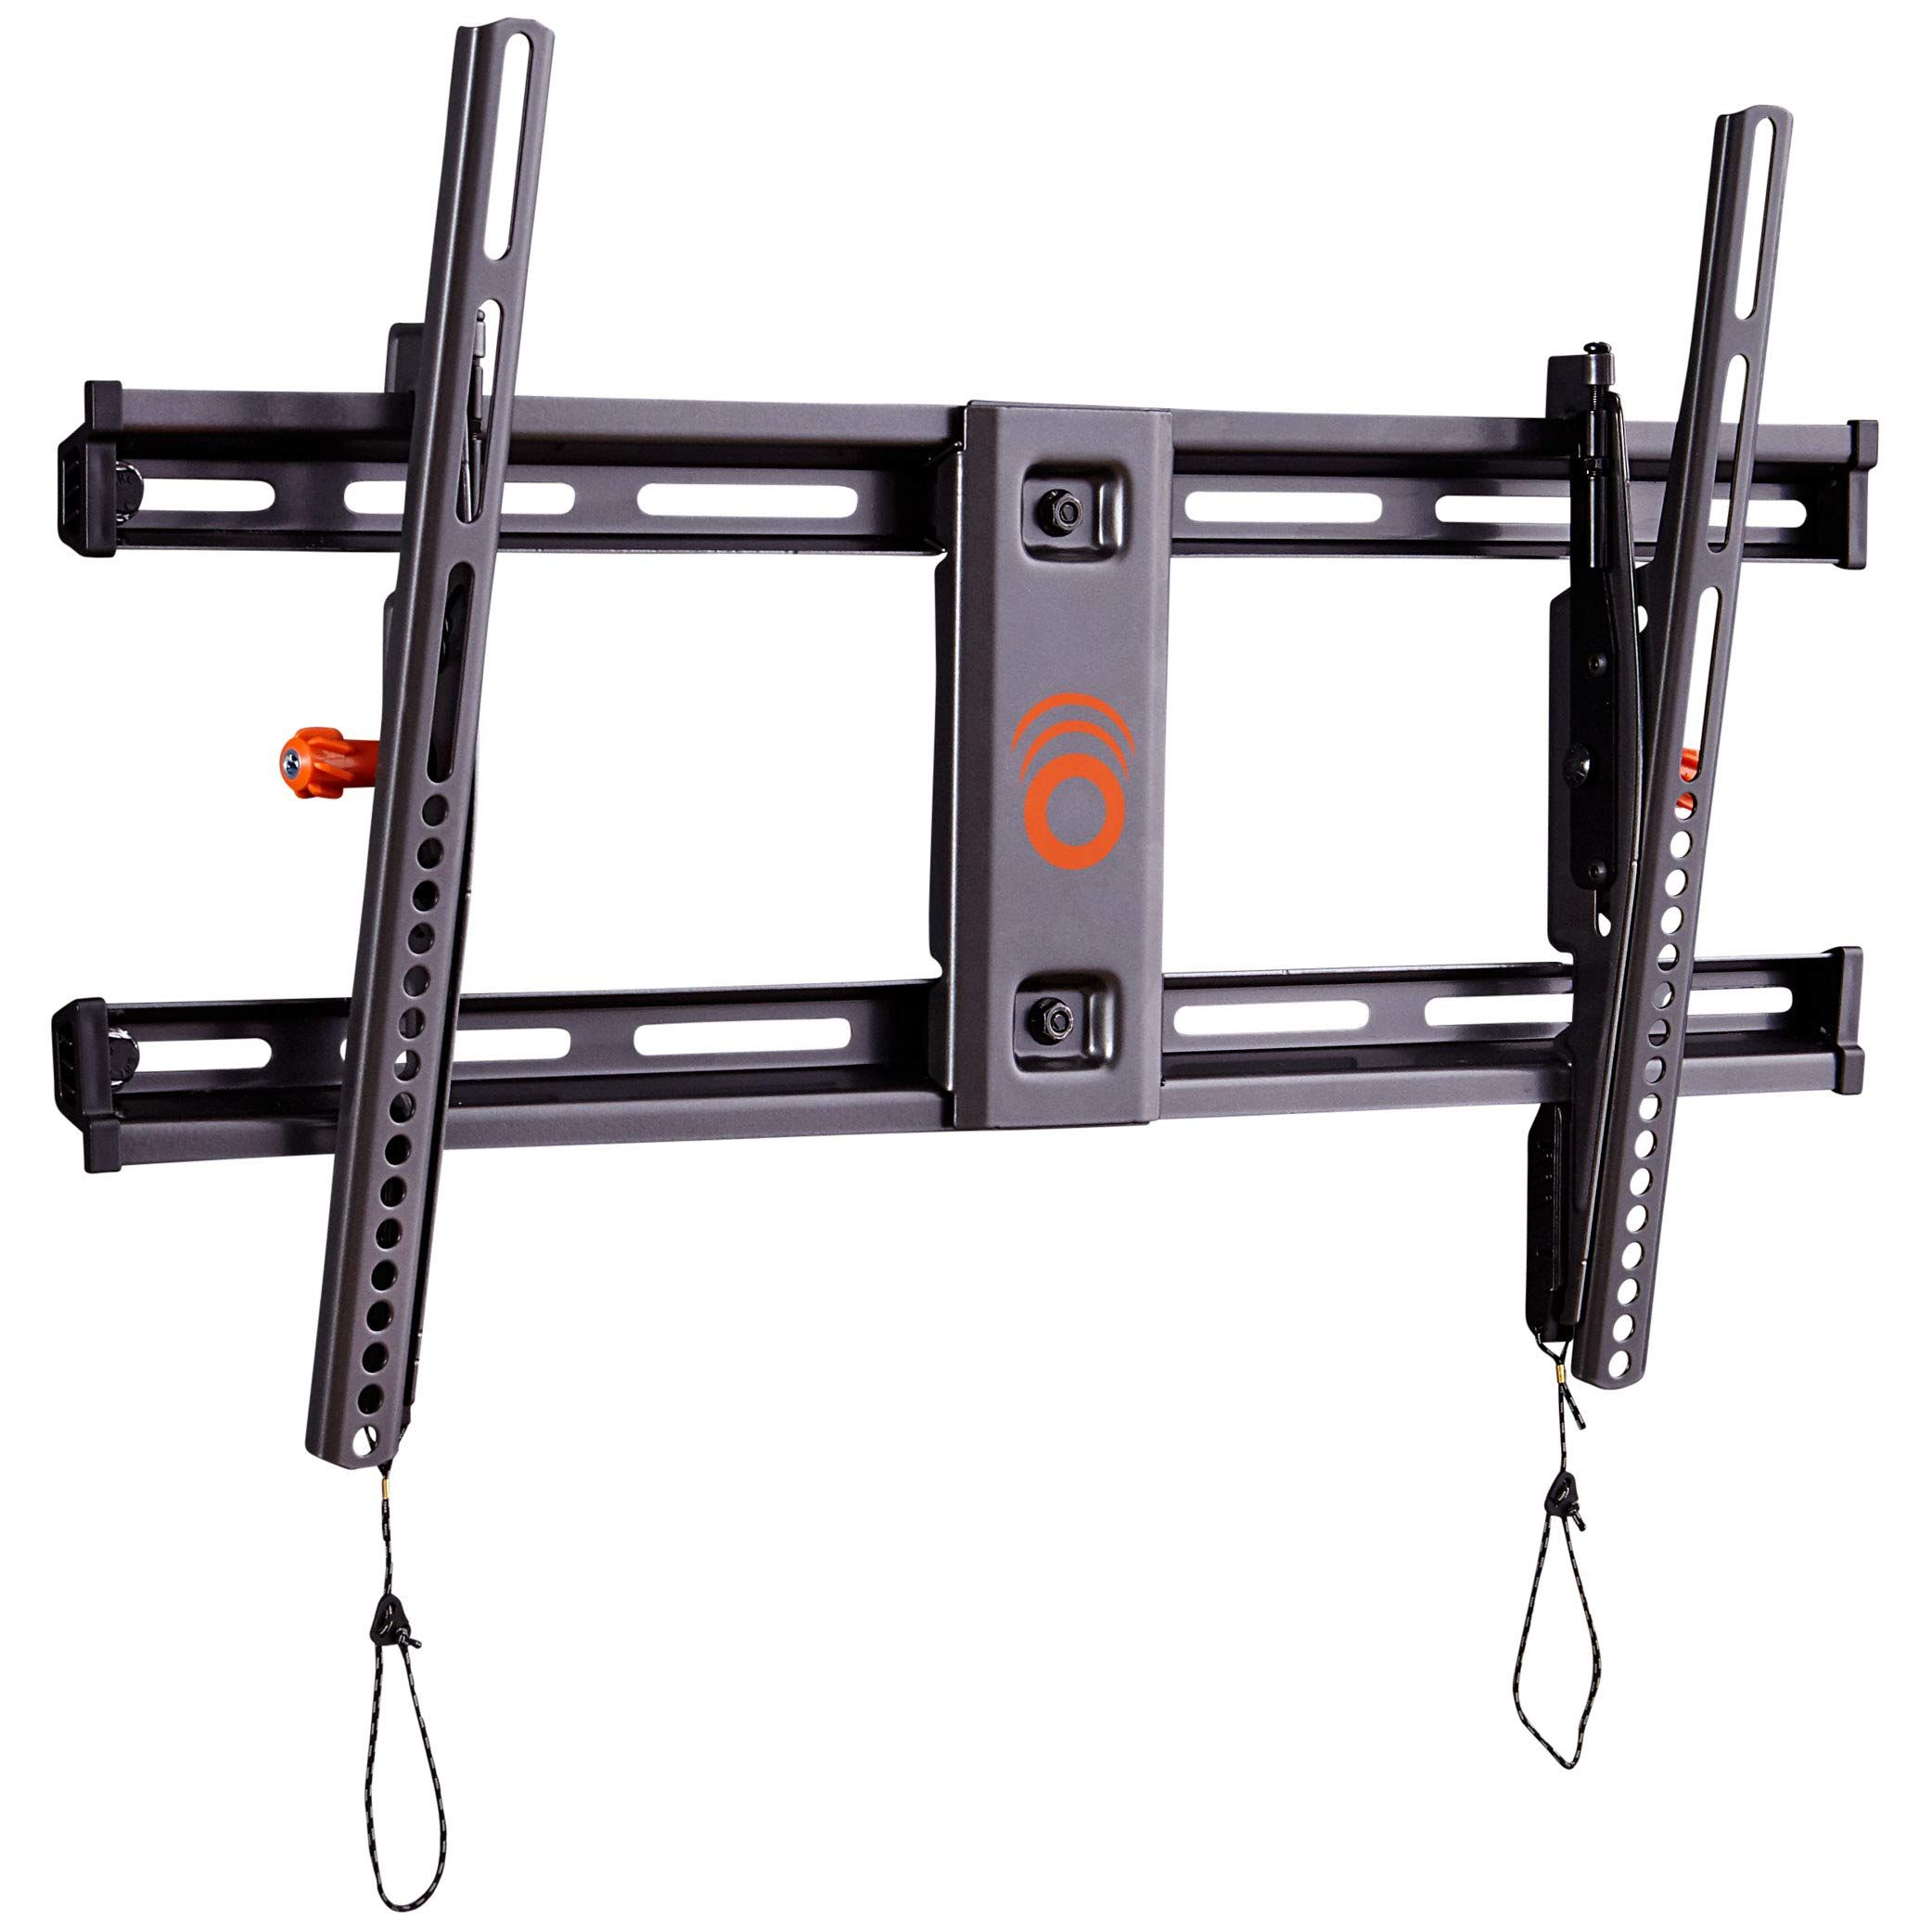 Echogear Tilting Tv Wall Mount With Low Profile Design For Regarding Tilted Wall Mount For Tv (View 9 of 15)